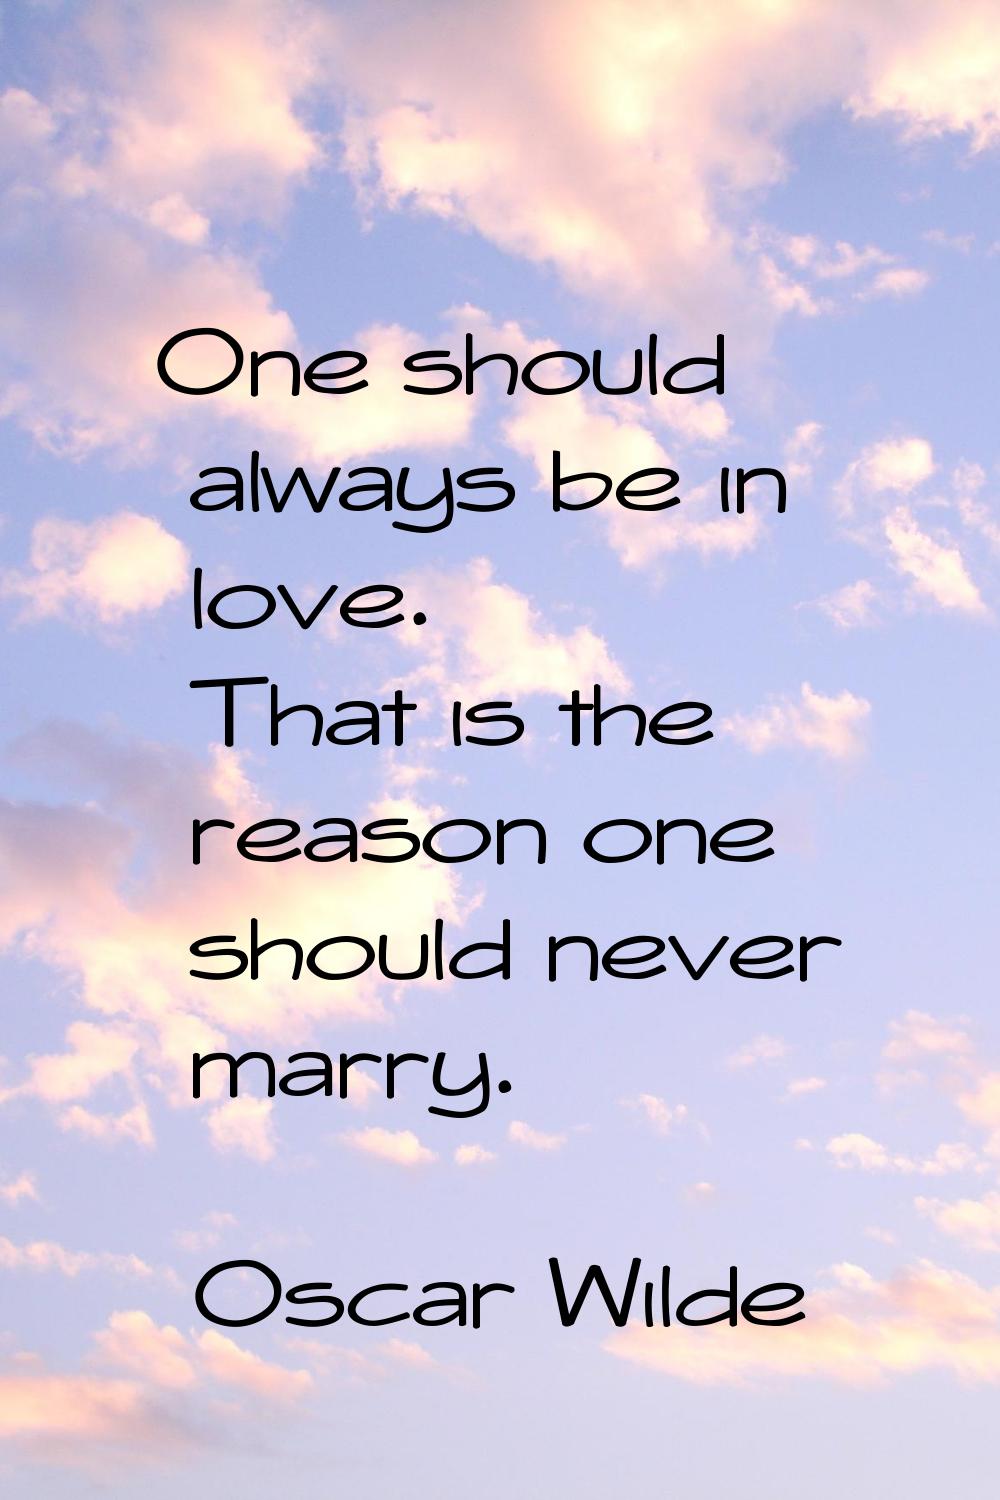 One should always be in love. That is the reason one should never marry.